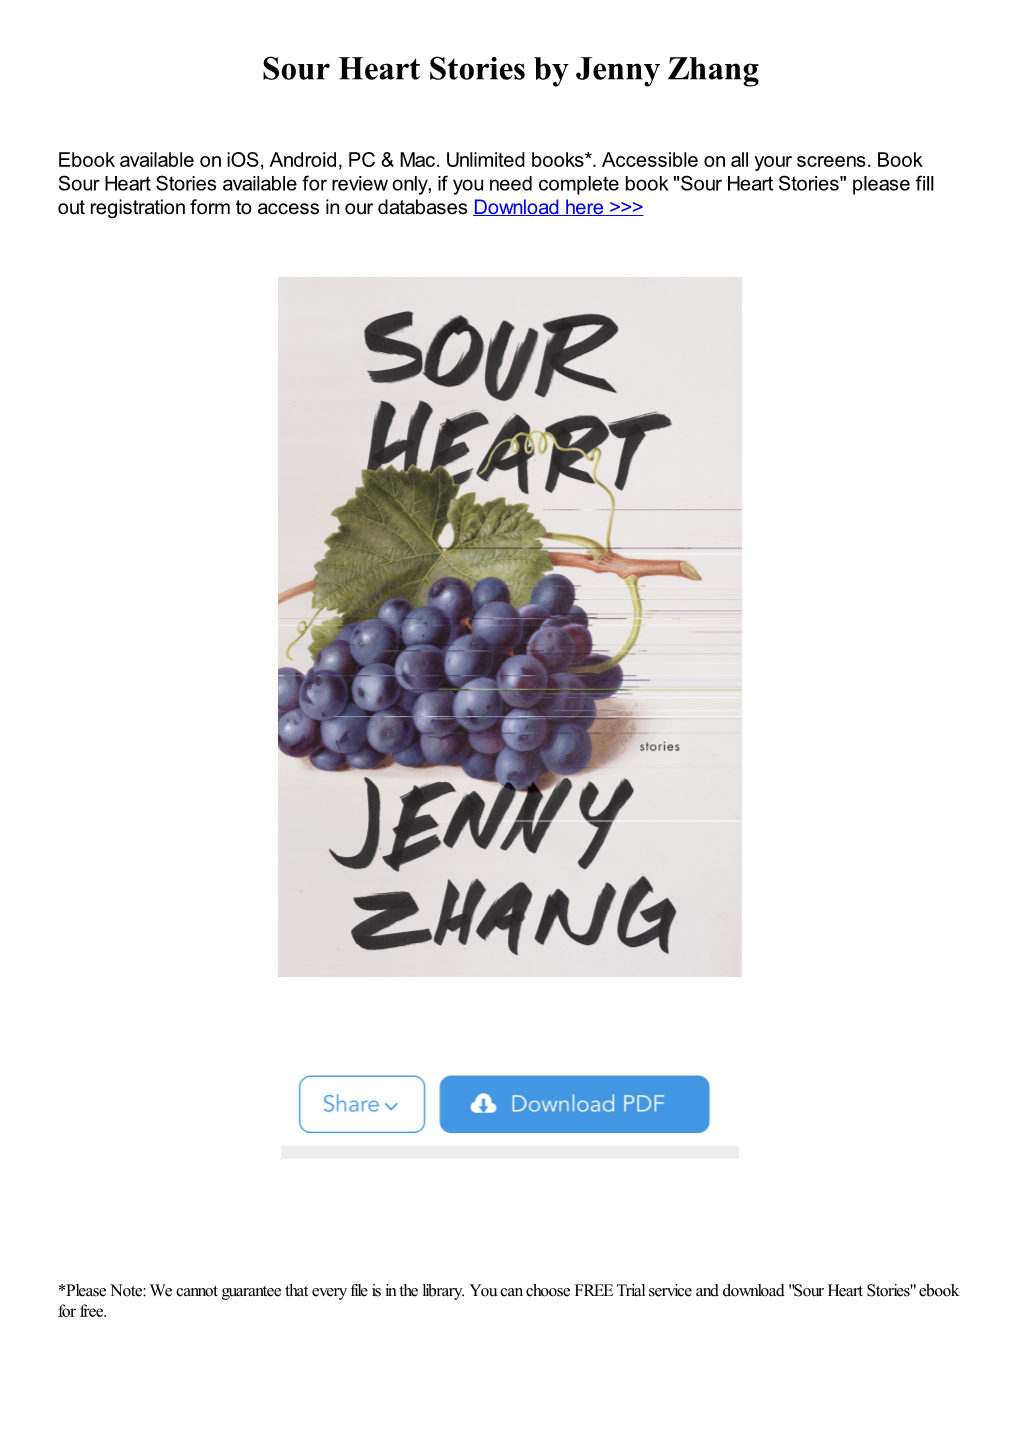 Sour Heart Stories by Jenny Zhang